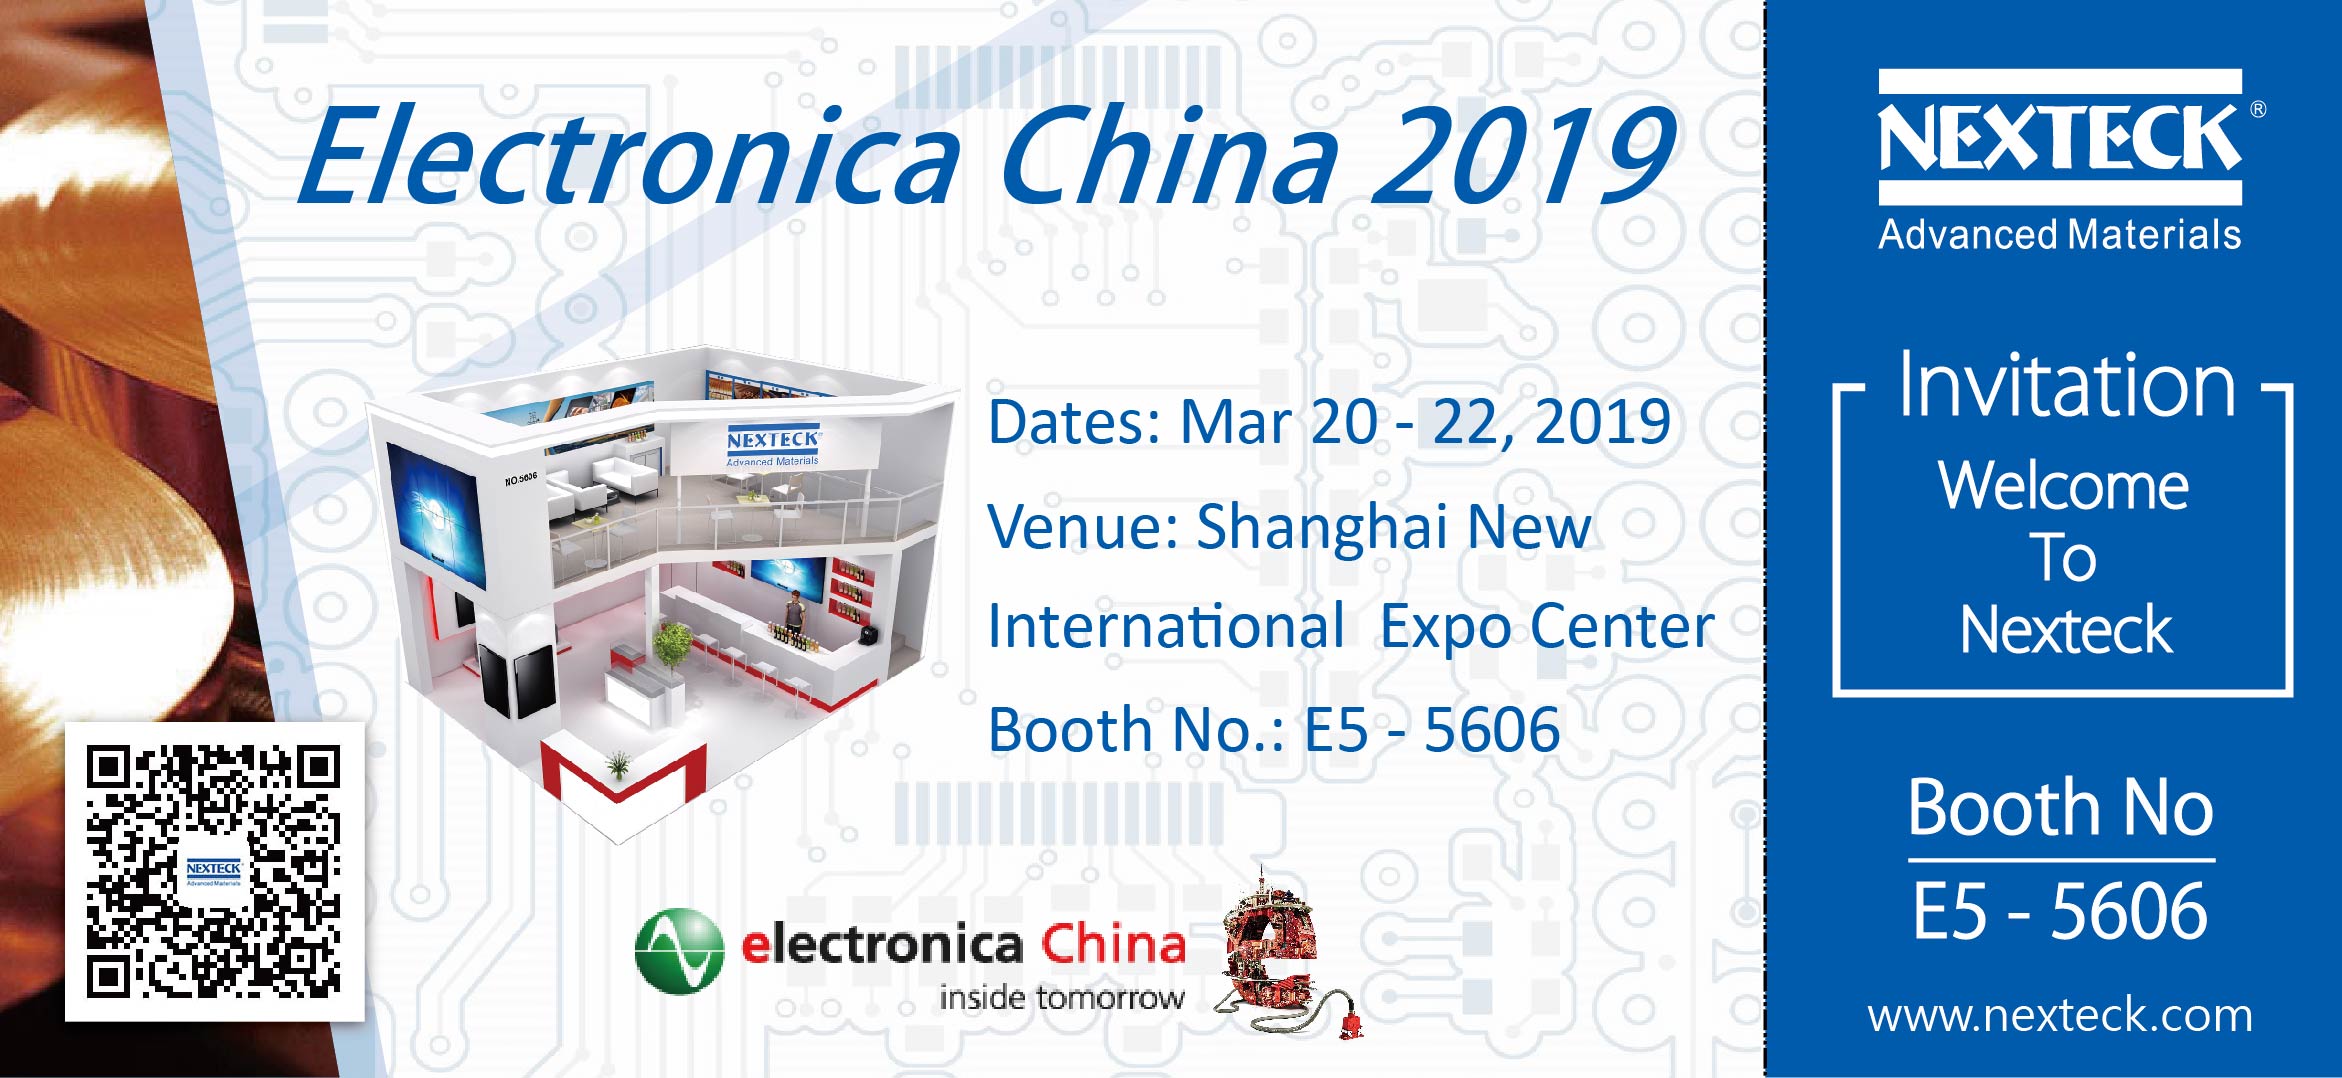 NEXTECK Expecting Your Arrival at Booth E5-5606, electronica China 2019